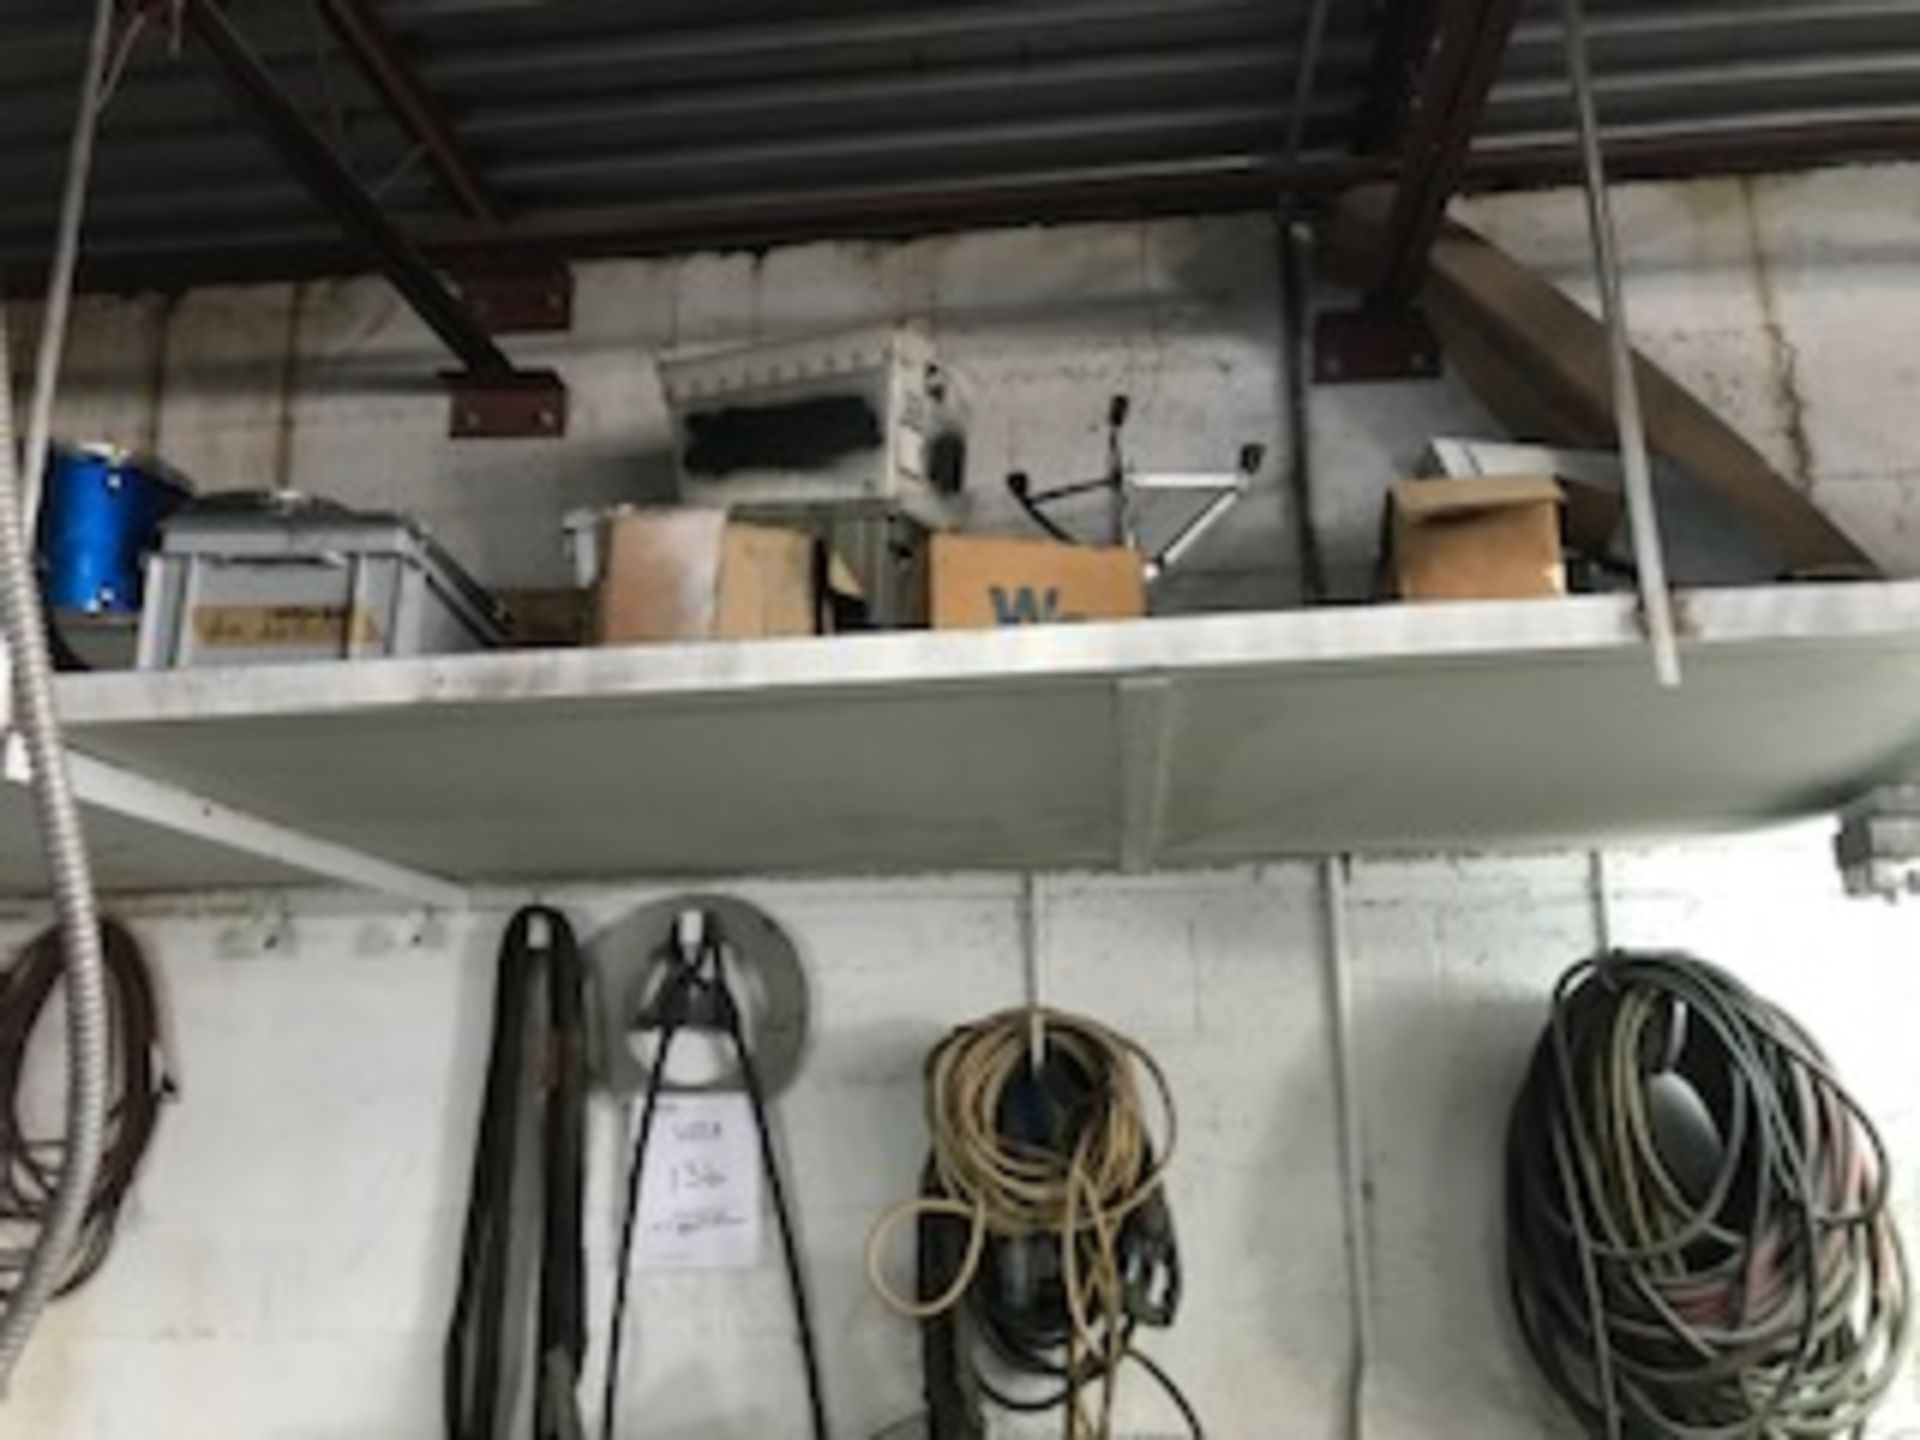 LOT CONTENTS OF LOFT - COOLERS, TIRES, WIRE FEEDERS, ETC (NO DRUMS / NO PERSONAL EFFECTS) - Image 3 of 5